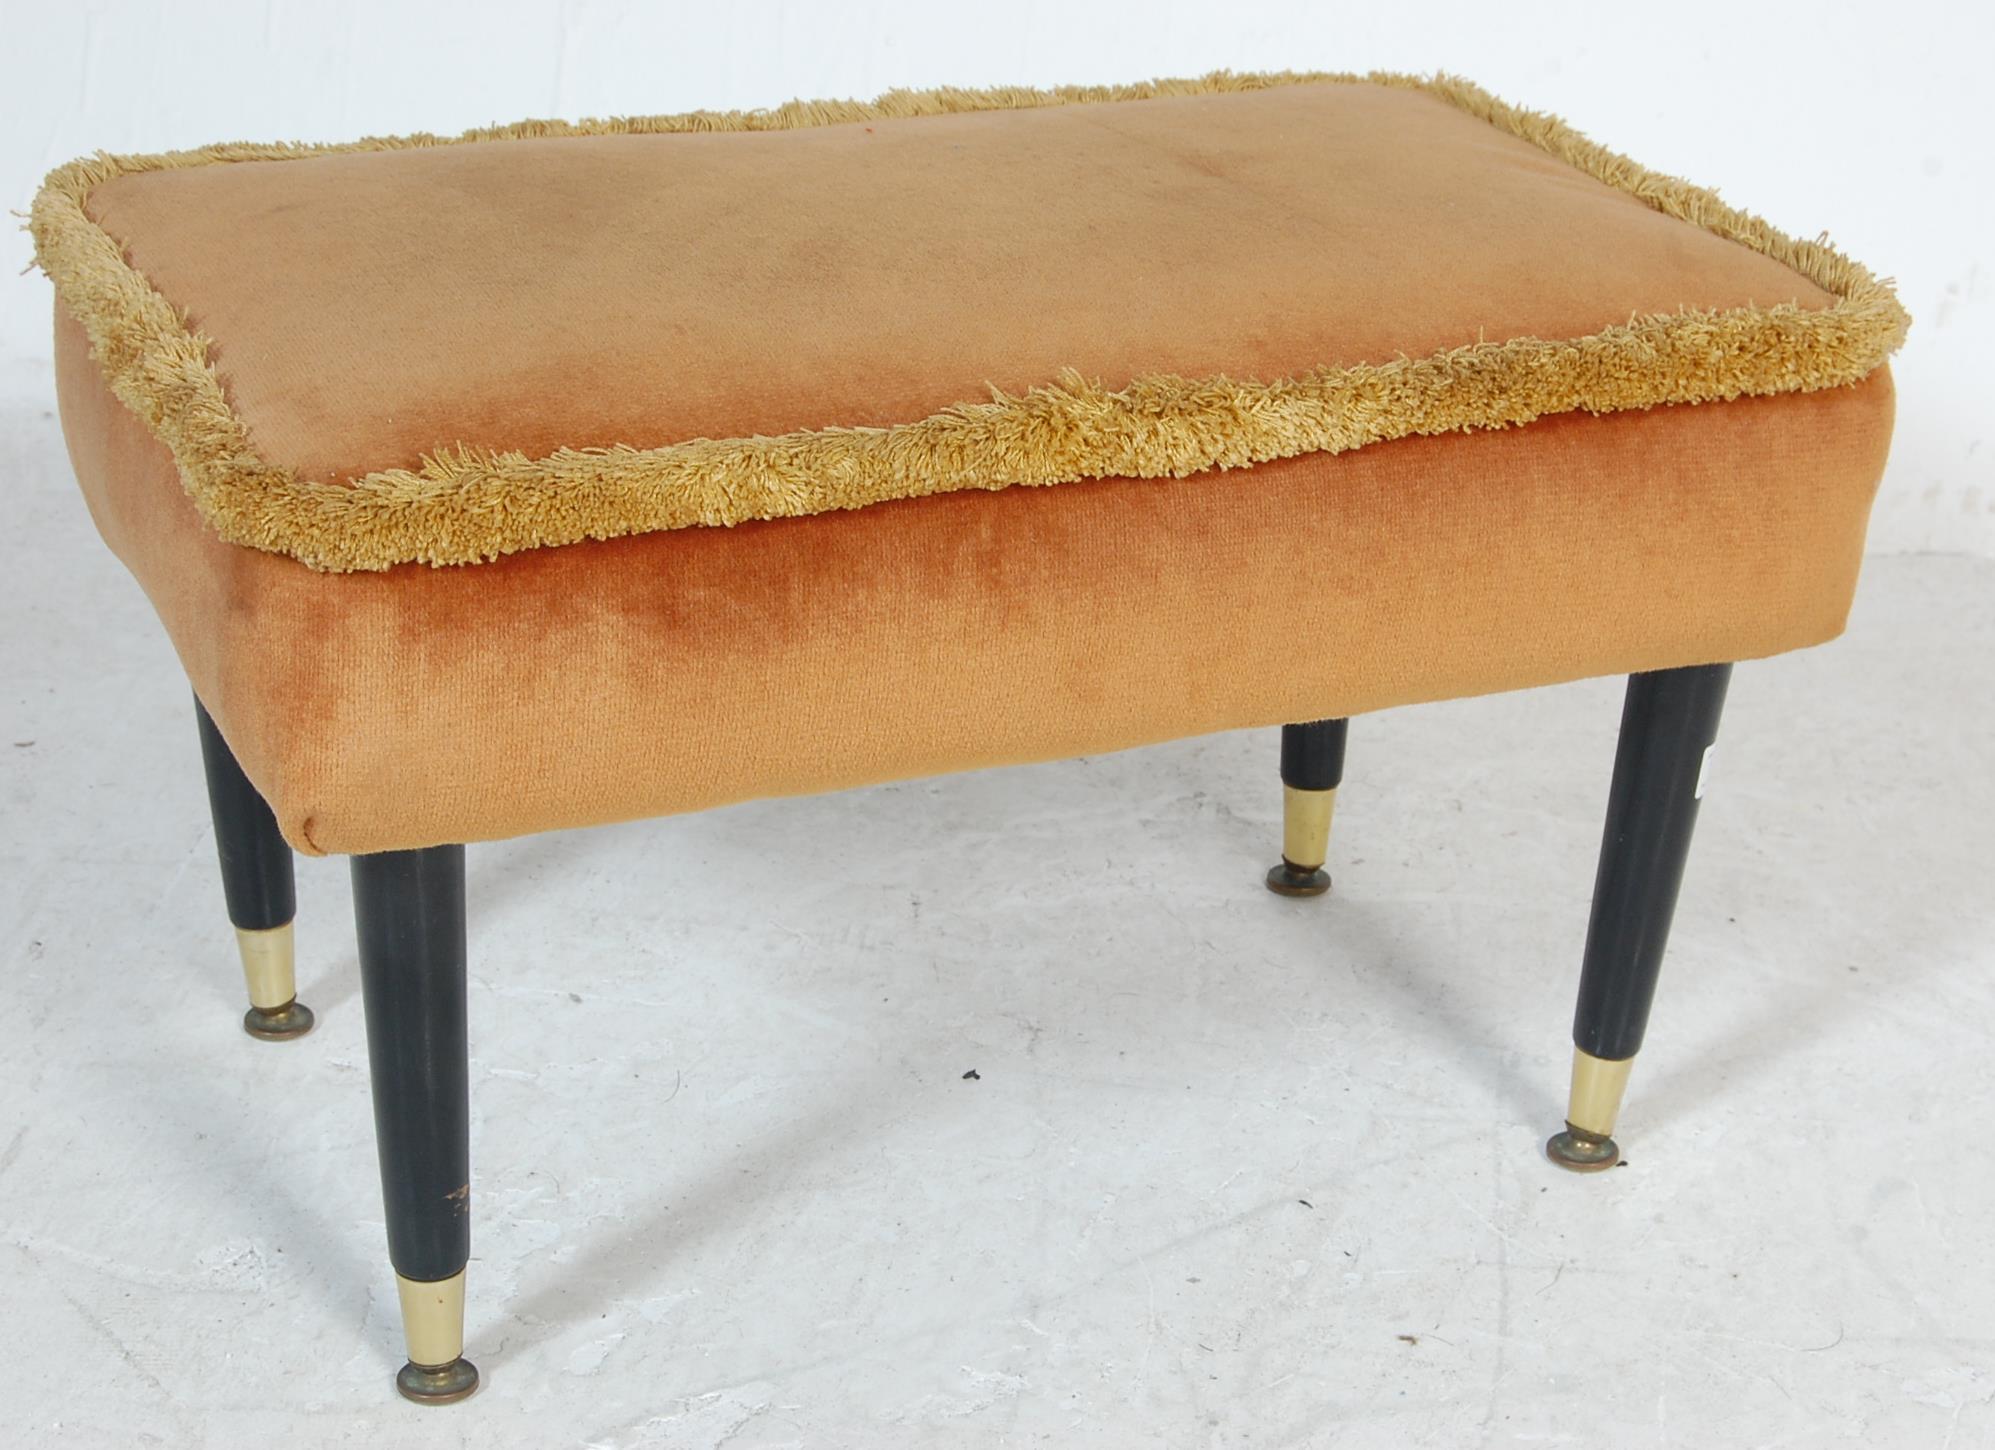 1950’S VINTAGE RETRO DRESSING TABLE STOOL - Image 2 of 5